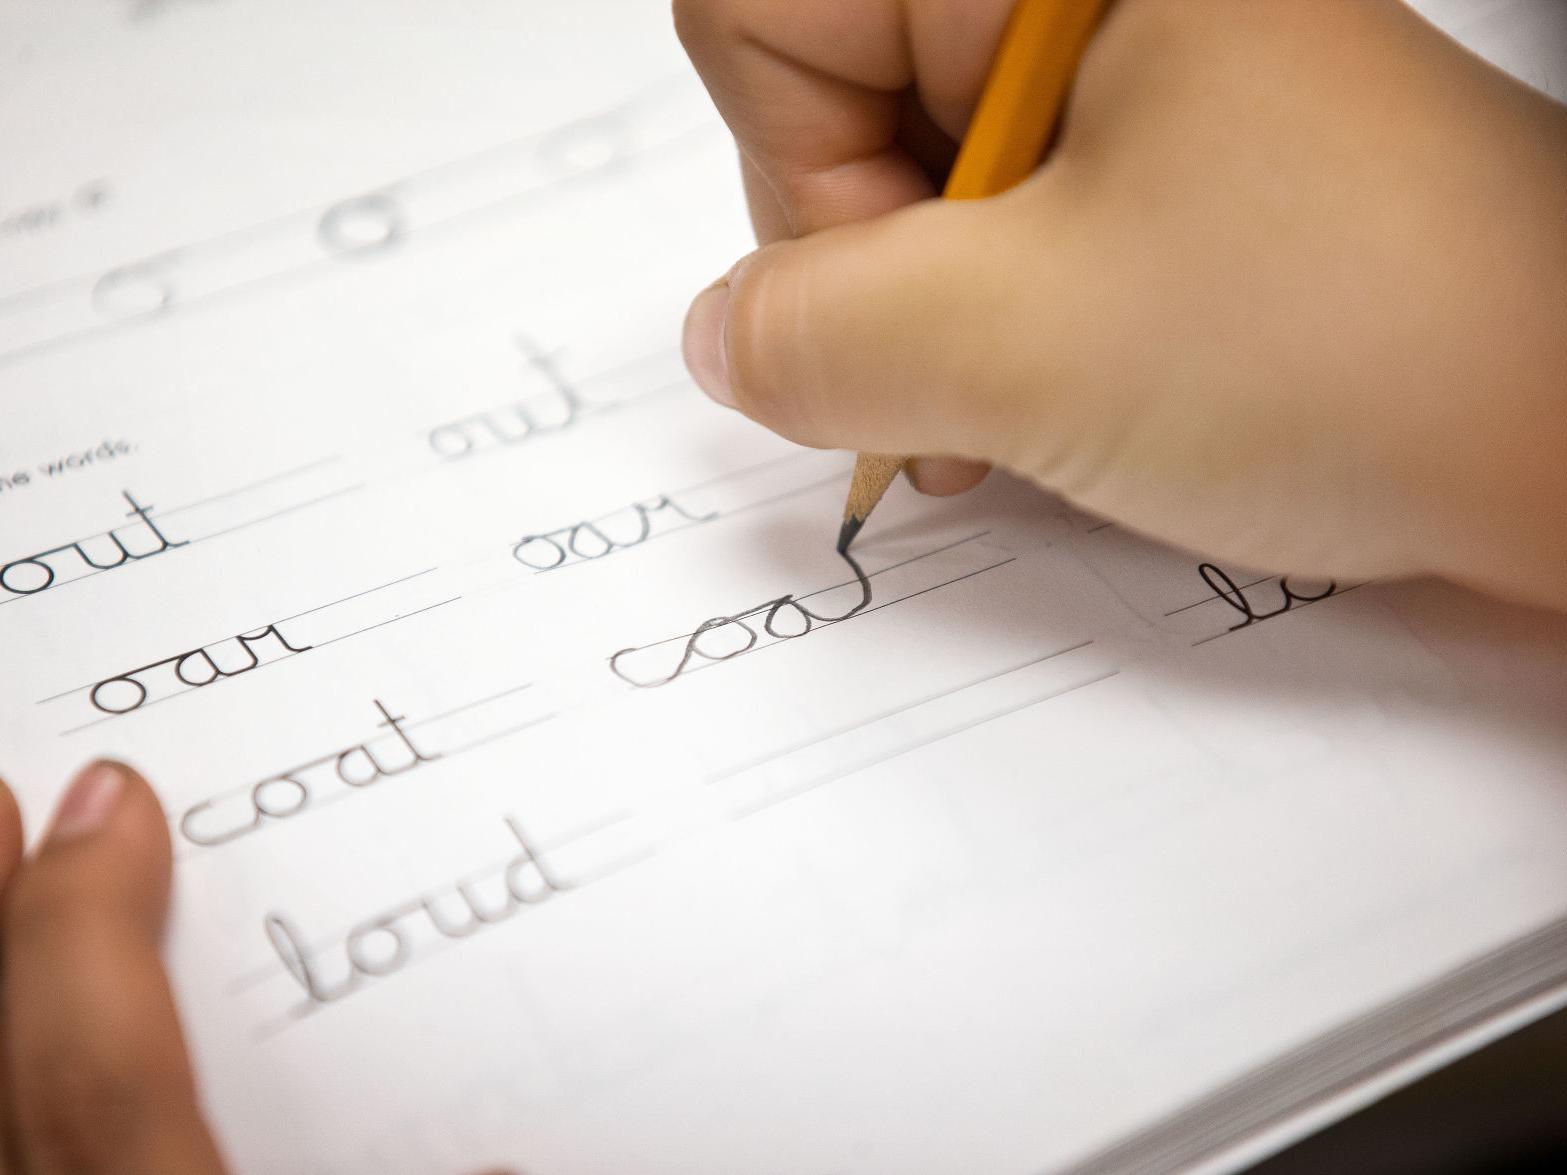 Tom Purcell: Time to embrace cursive handwriting again  Opinion